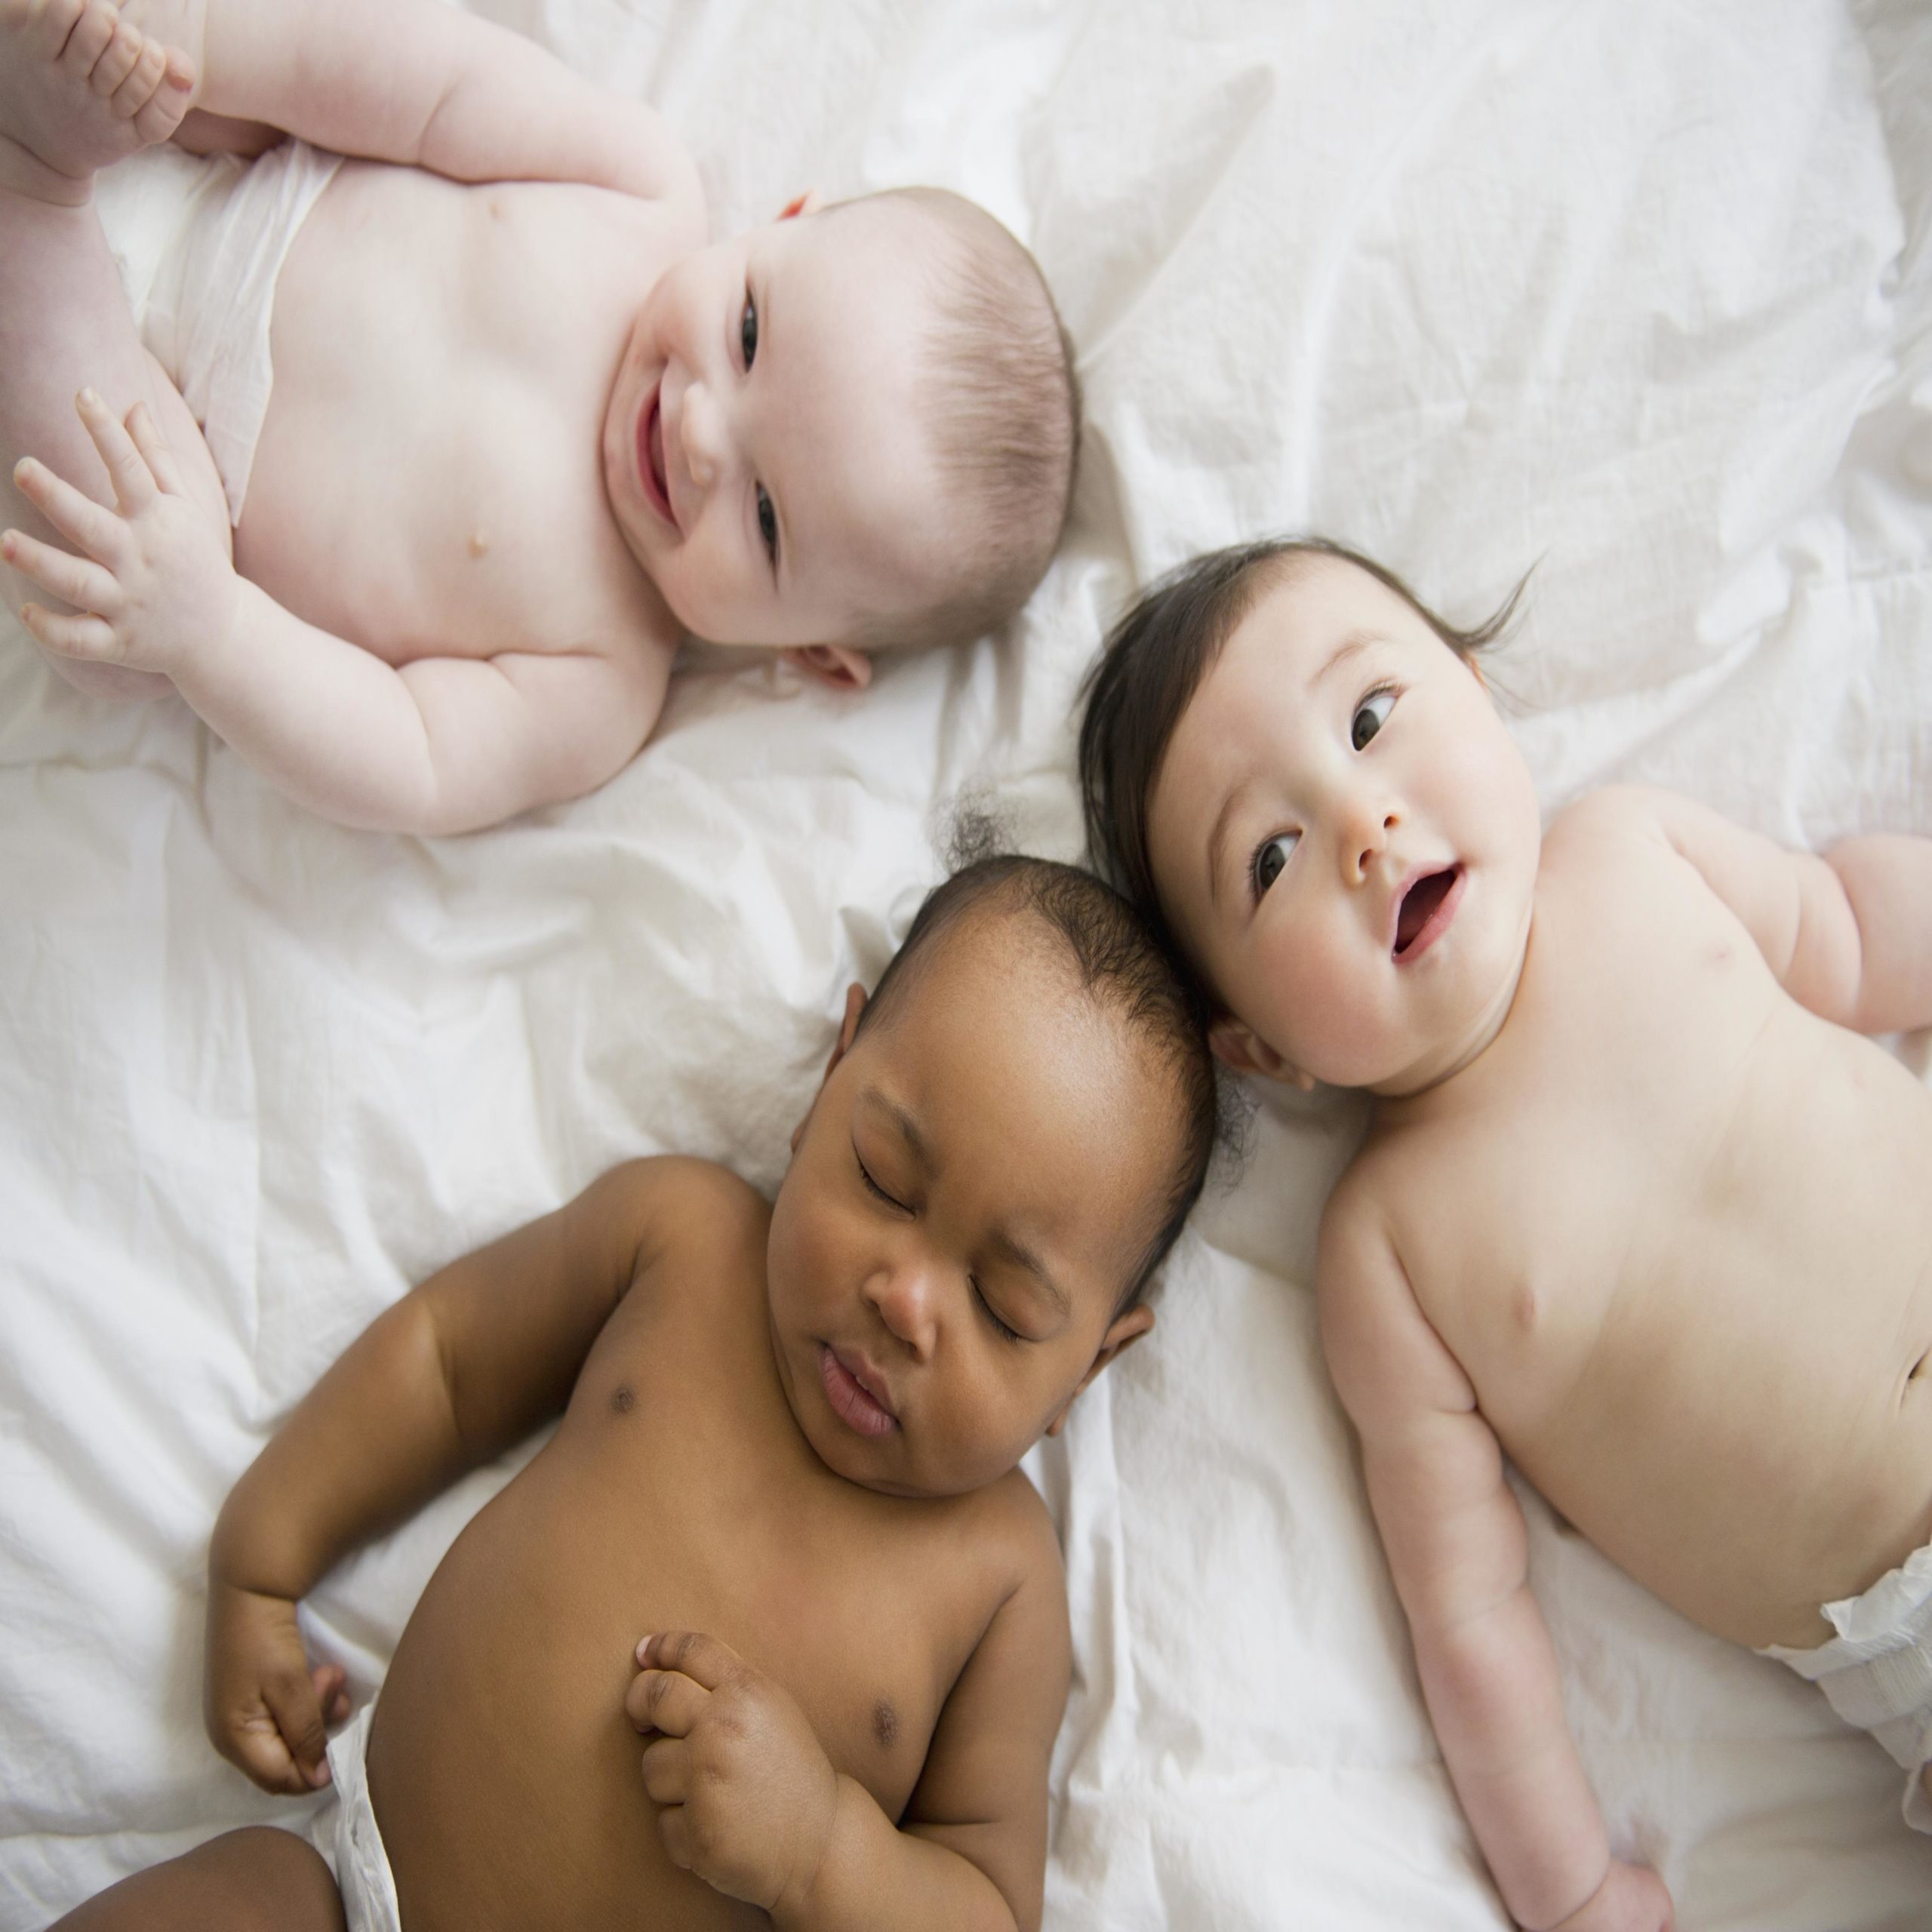 babies laying in a circle wearing nothing but diapers